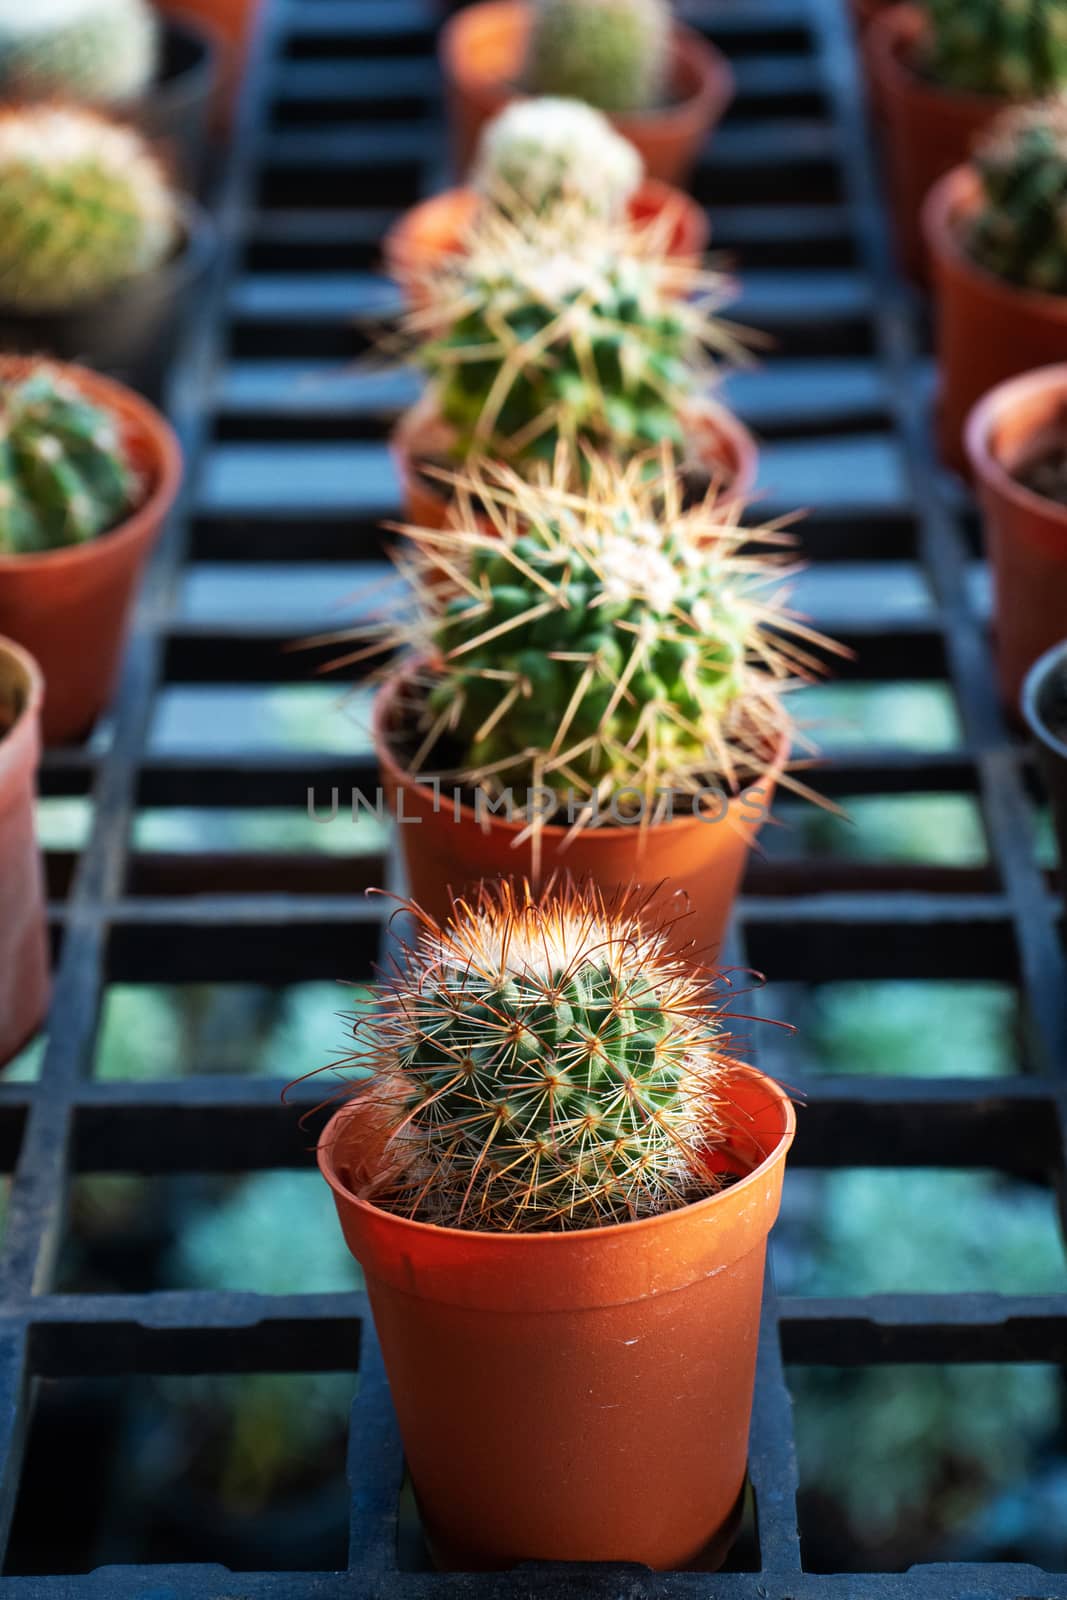 Small decorative pots with flowers cacti. View from above. Decor with fresh flowers. Home Flowers.